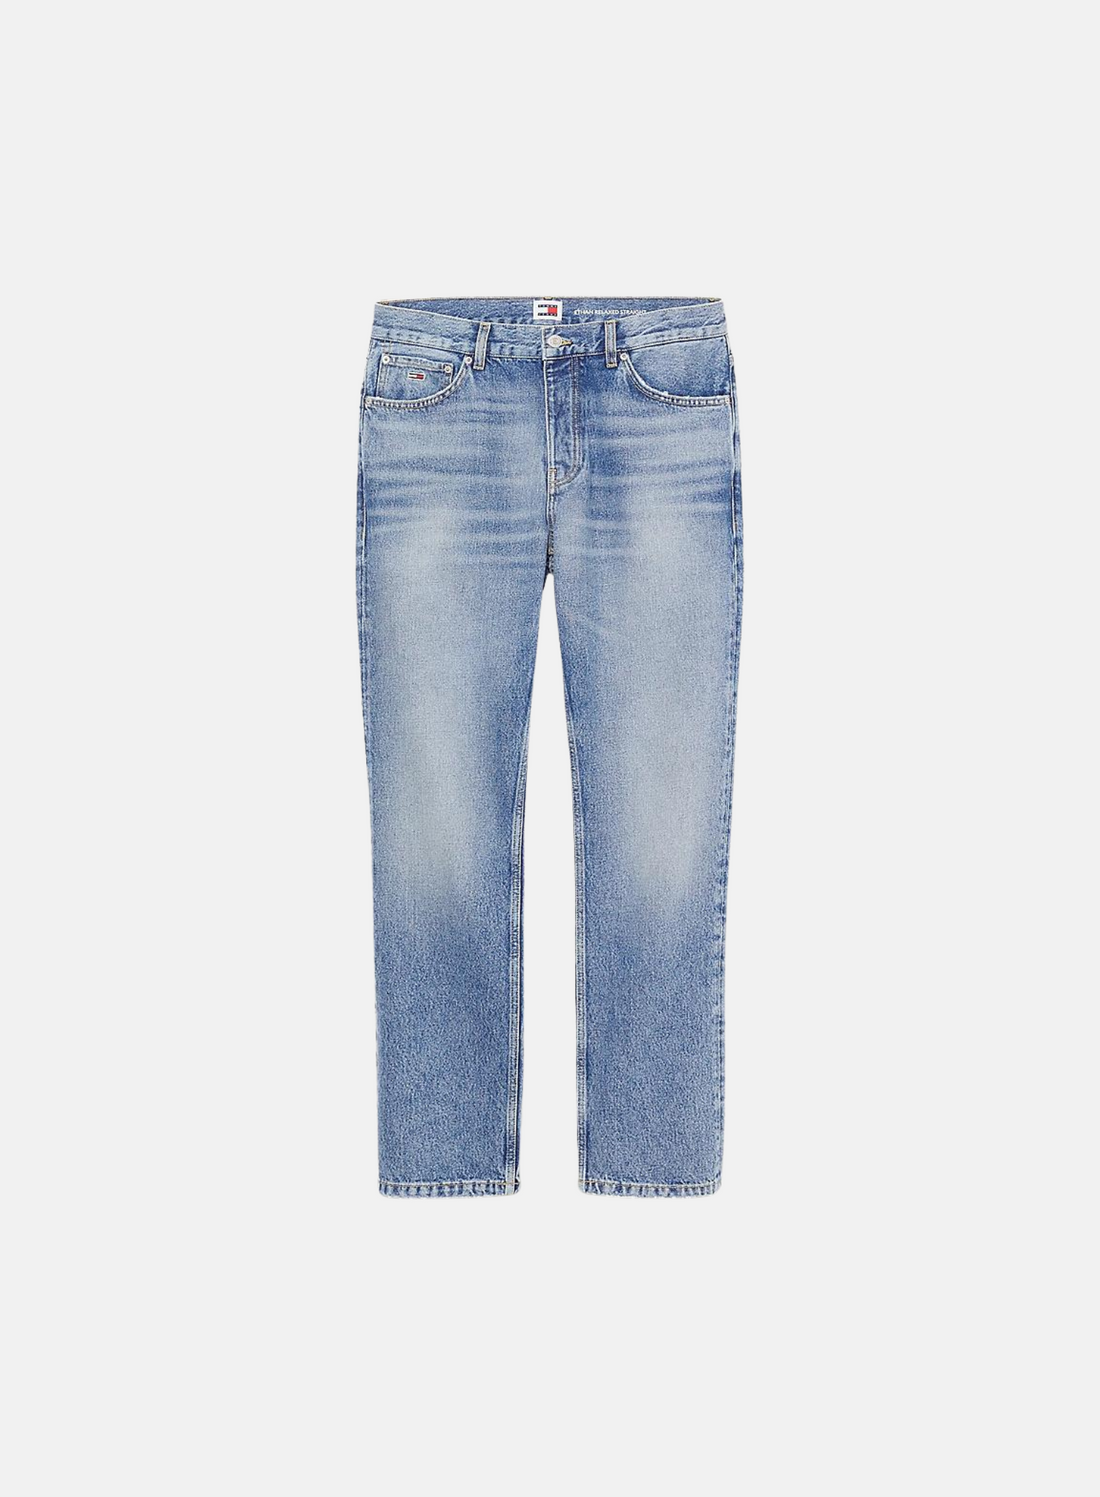 Tommy Jeans Ethan Relaxed Straight Faded Jeans - Hympala Store 